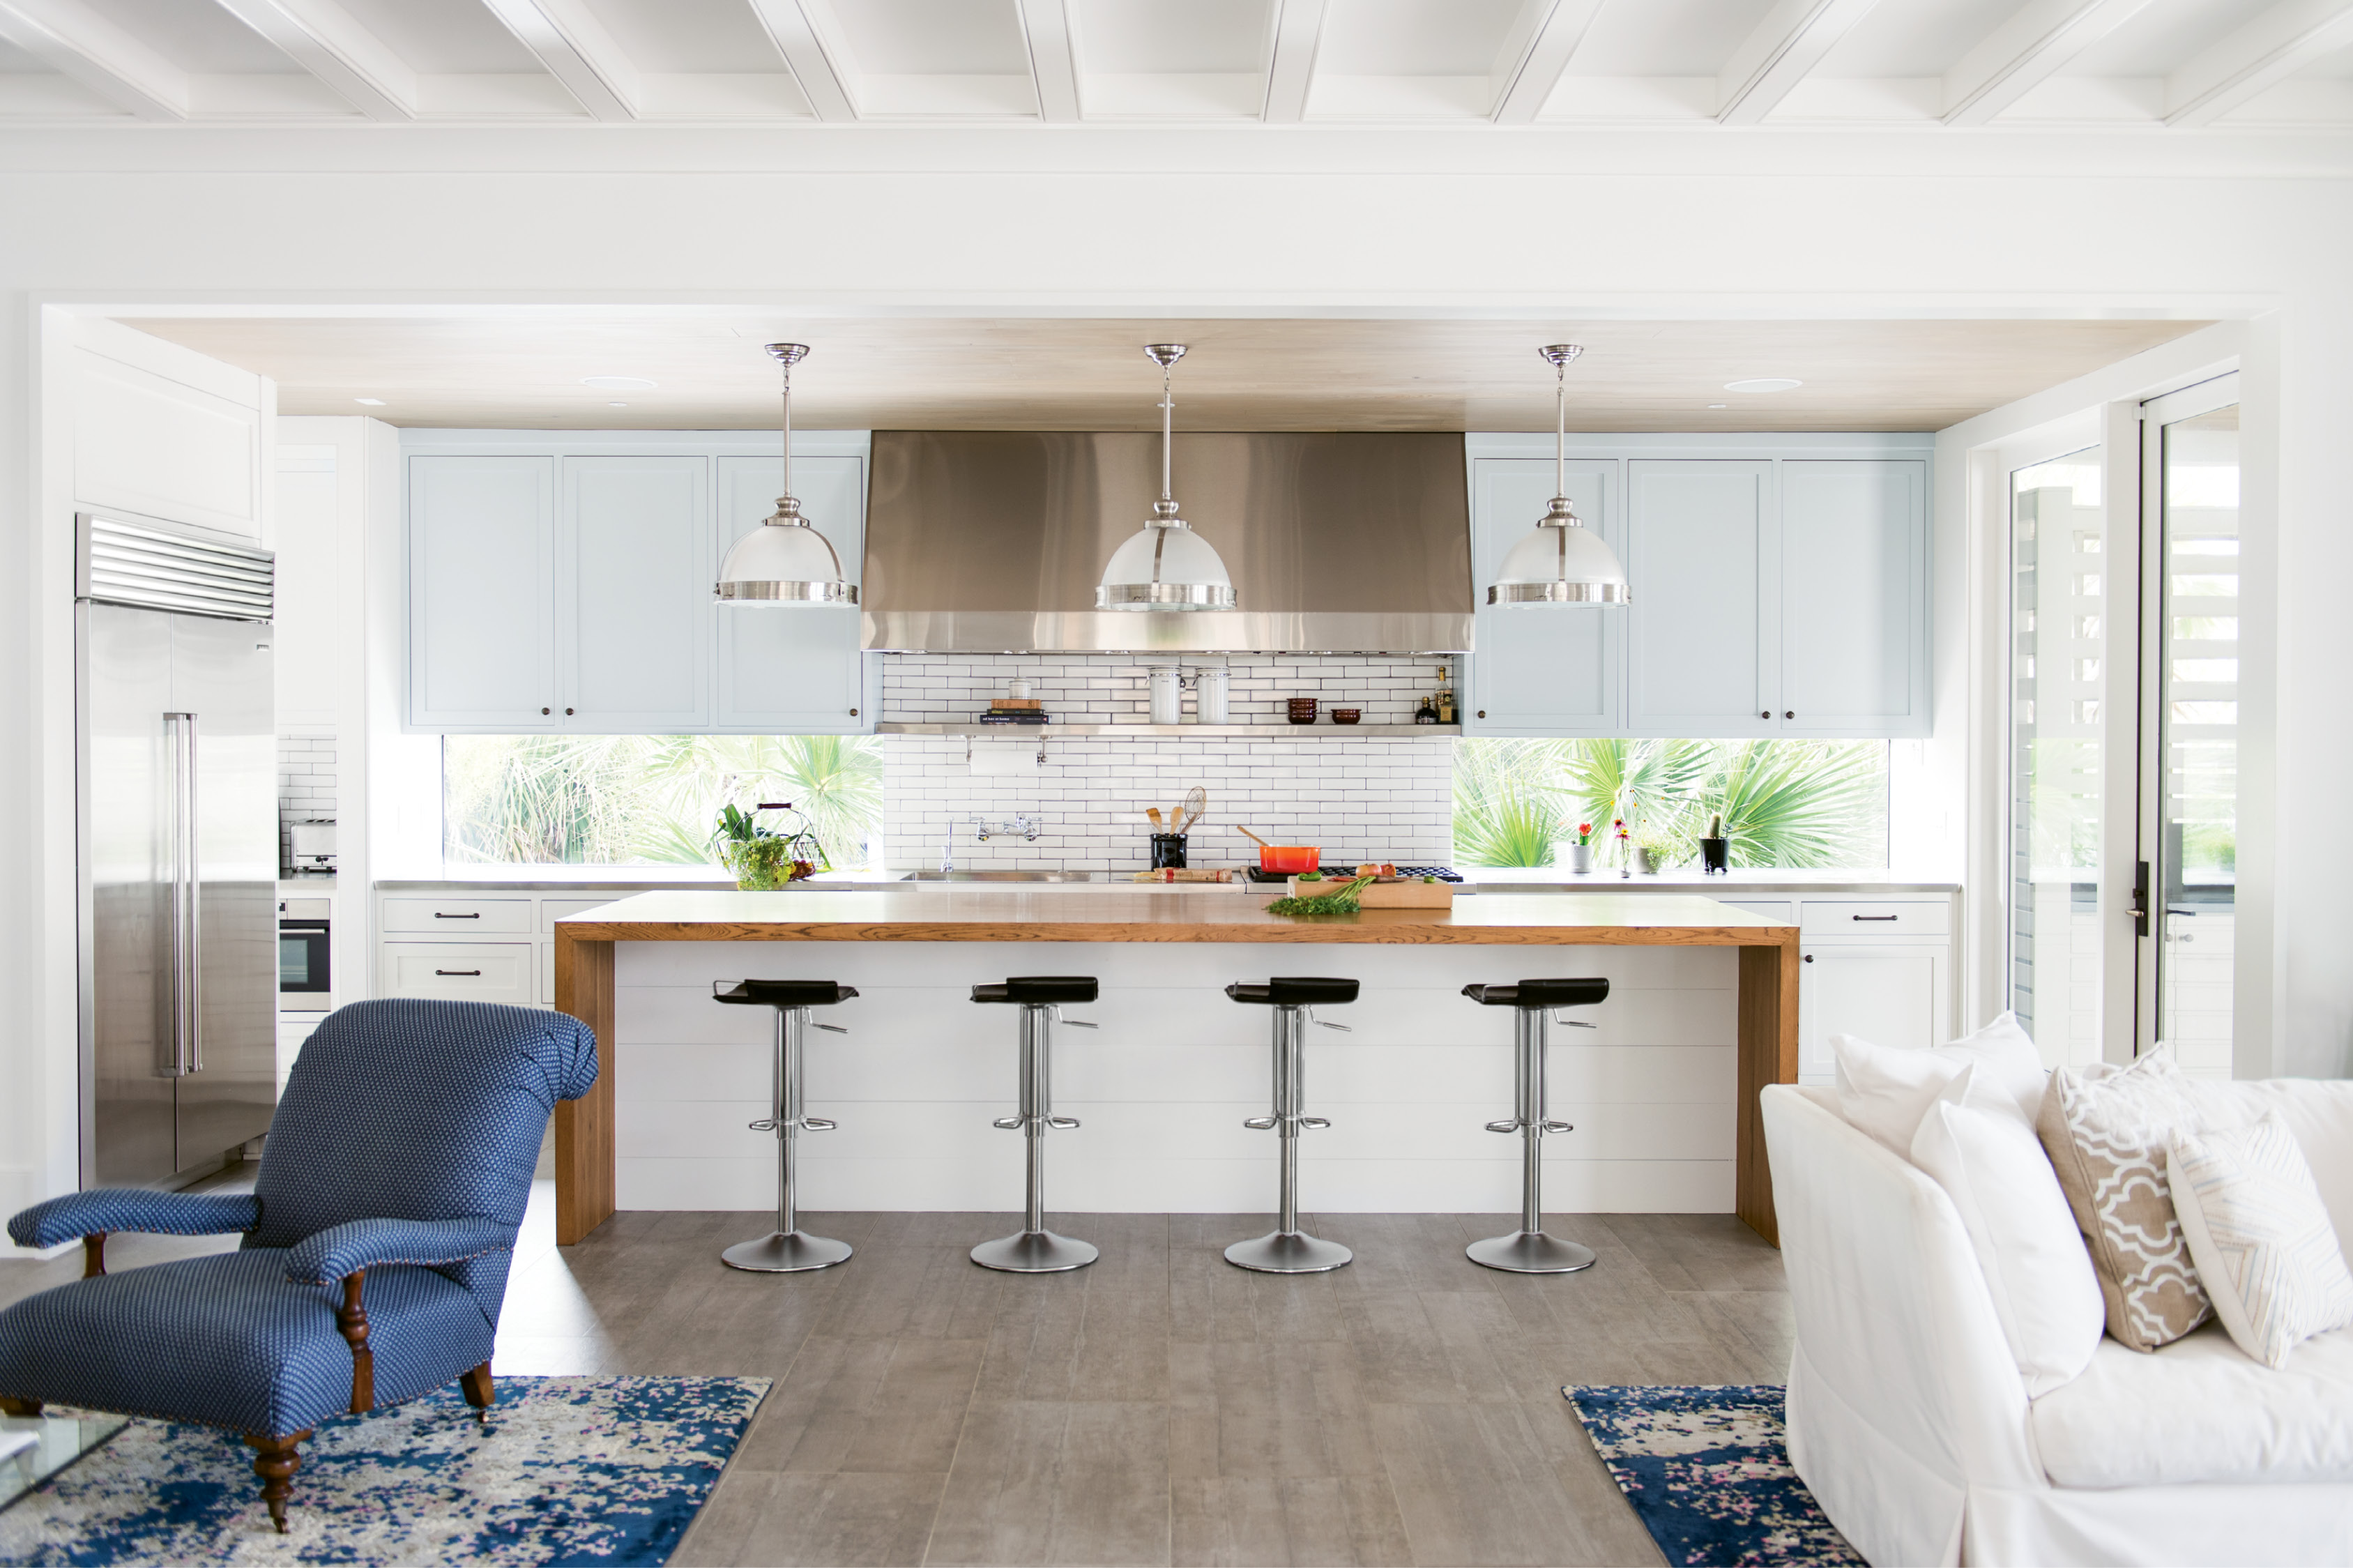 The use of windows over a traditional backsplash helps the home feel more connected to the landscape. Flush cypress ceilings and cement-tile flooring reinforce the modern feel.